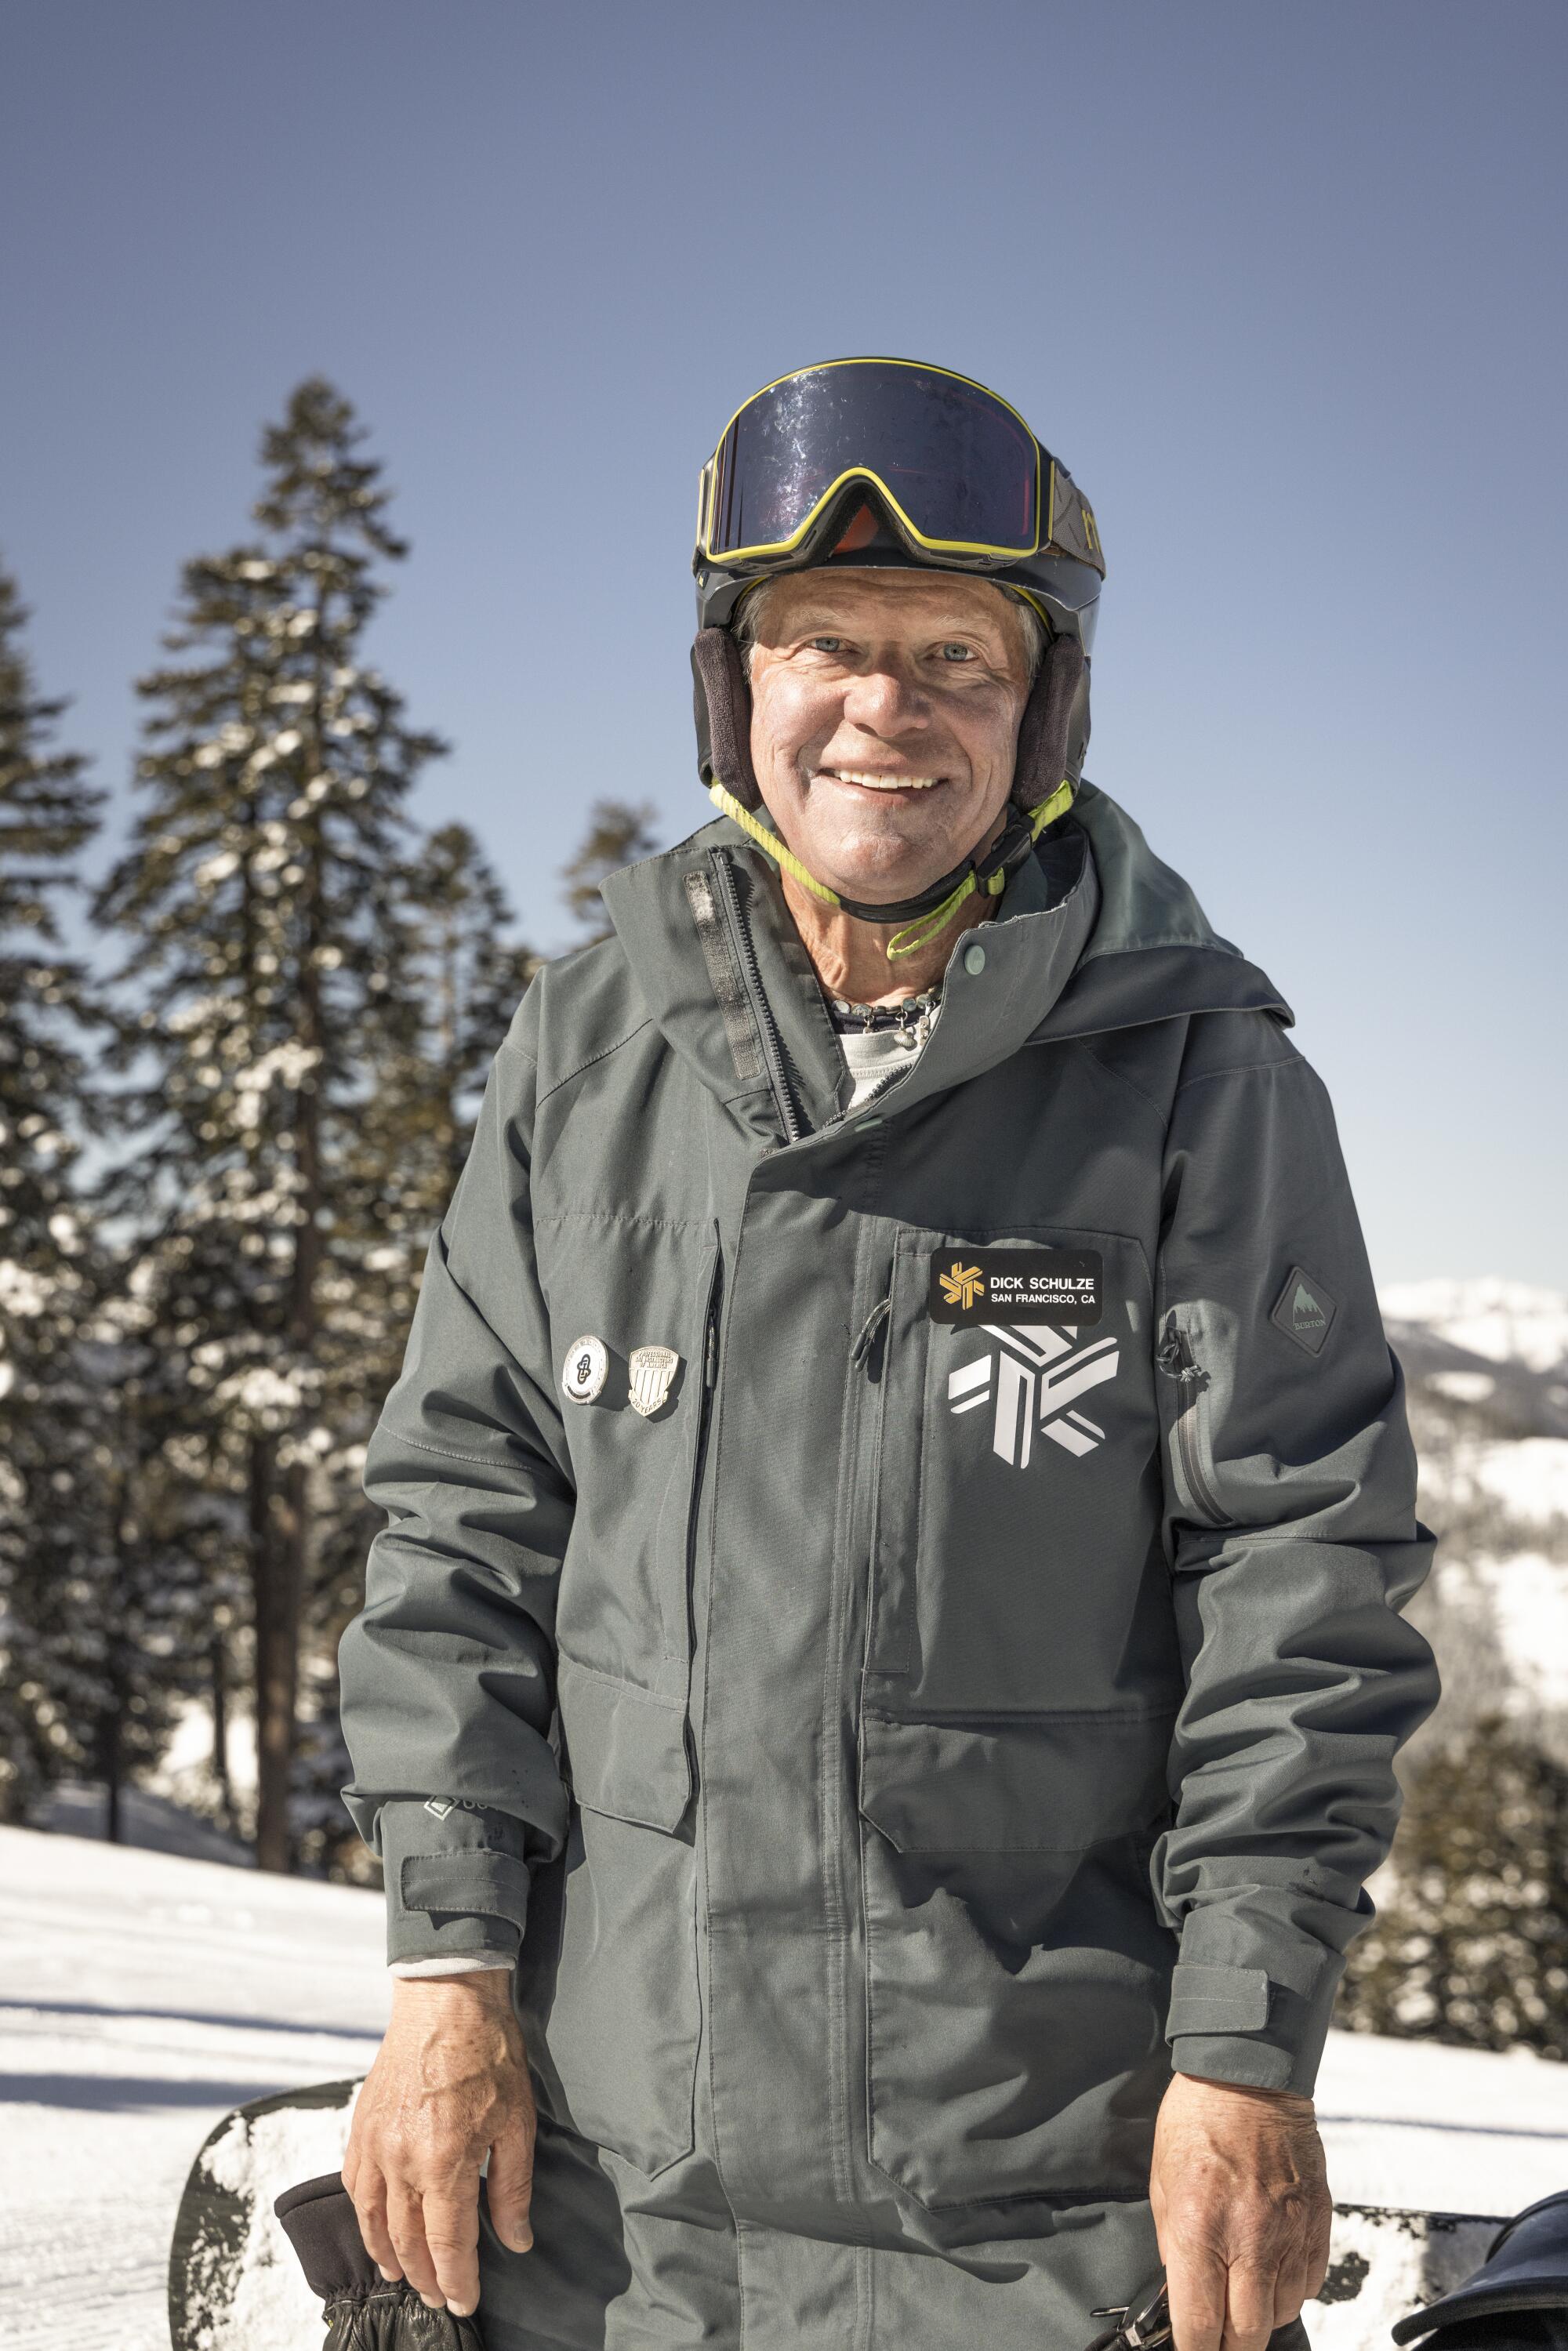 Snowboarder Dick Schulze "still rips," says his grandson — titanium knee and all.